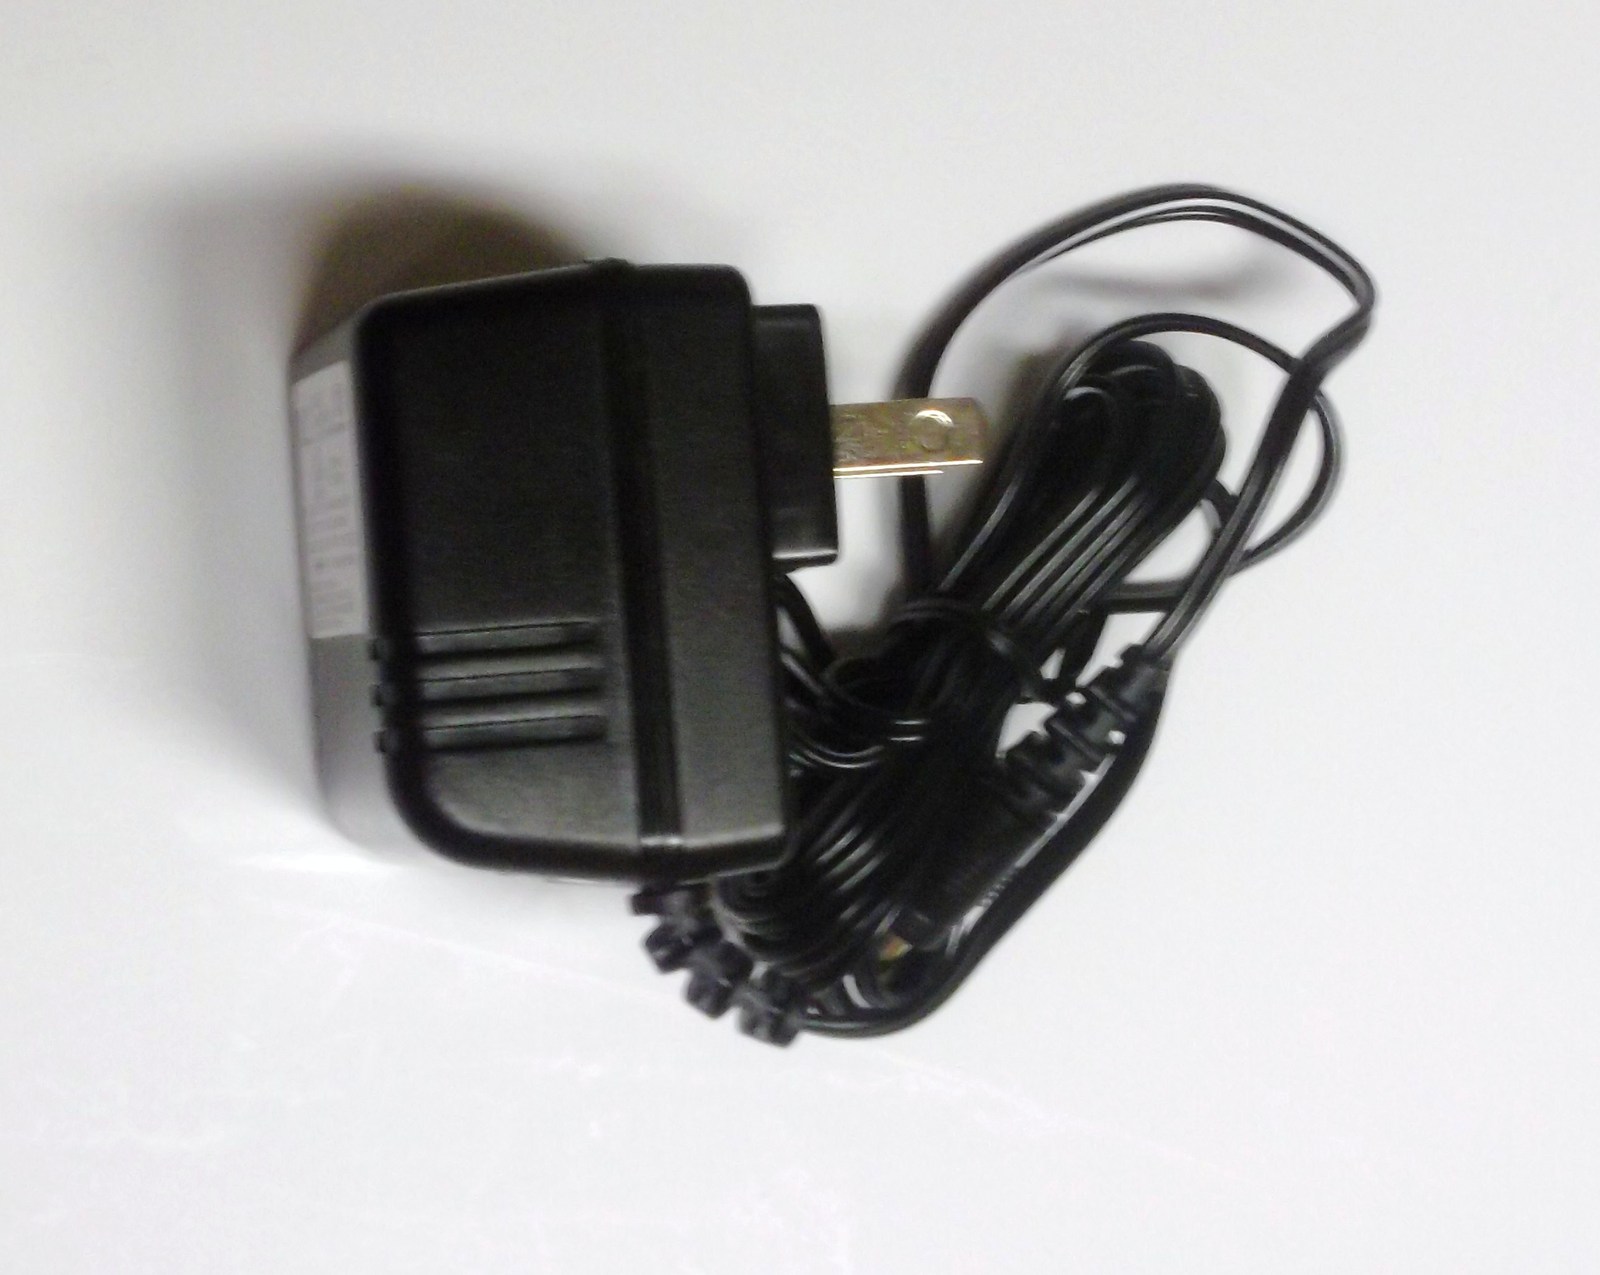 Original Charger For Ninebot ES1 ES2 ES4 Scooter And Xiaomi M365 42V 71W US  Plug Power Supply